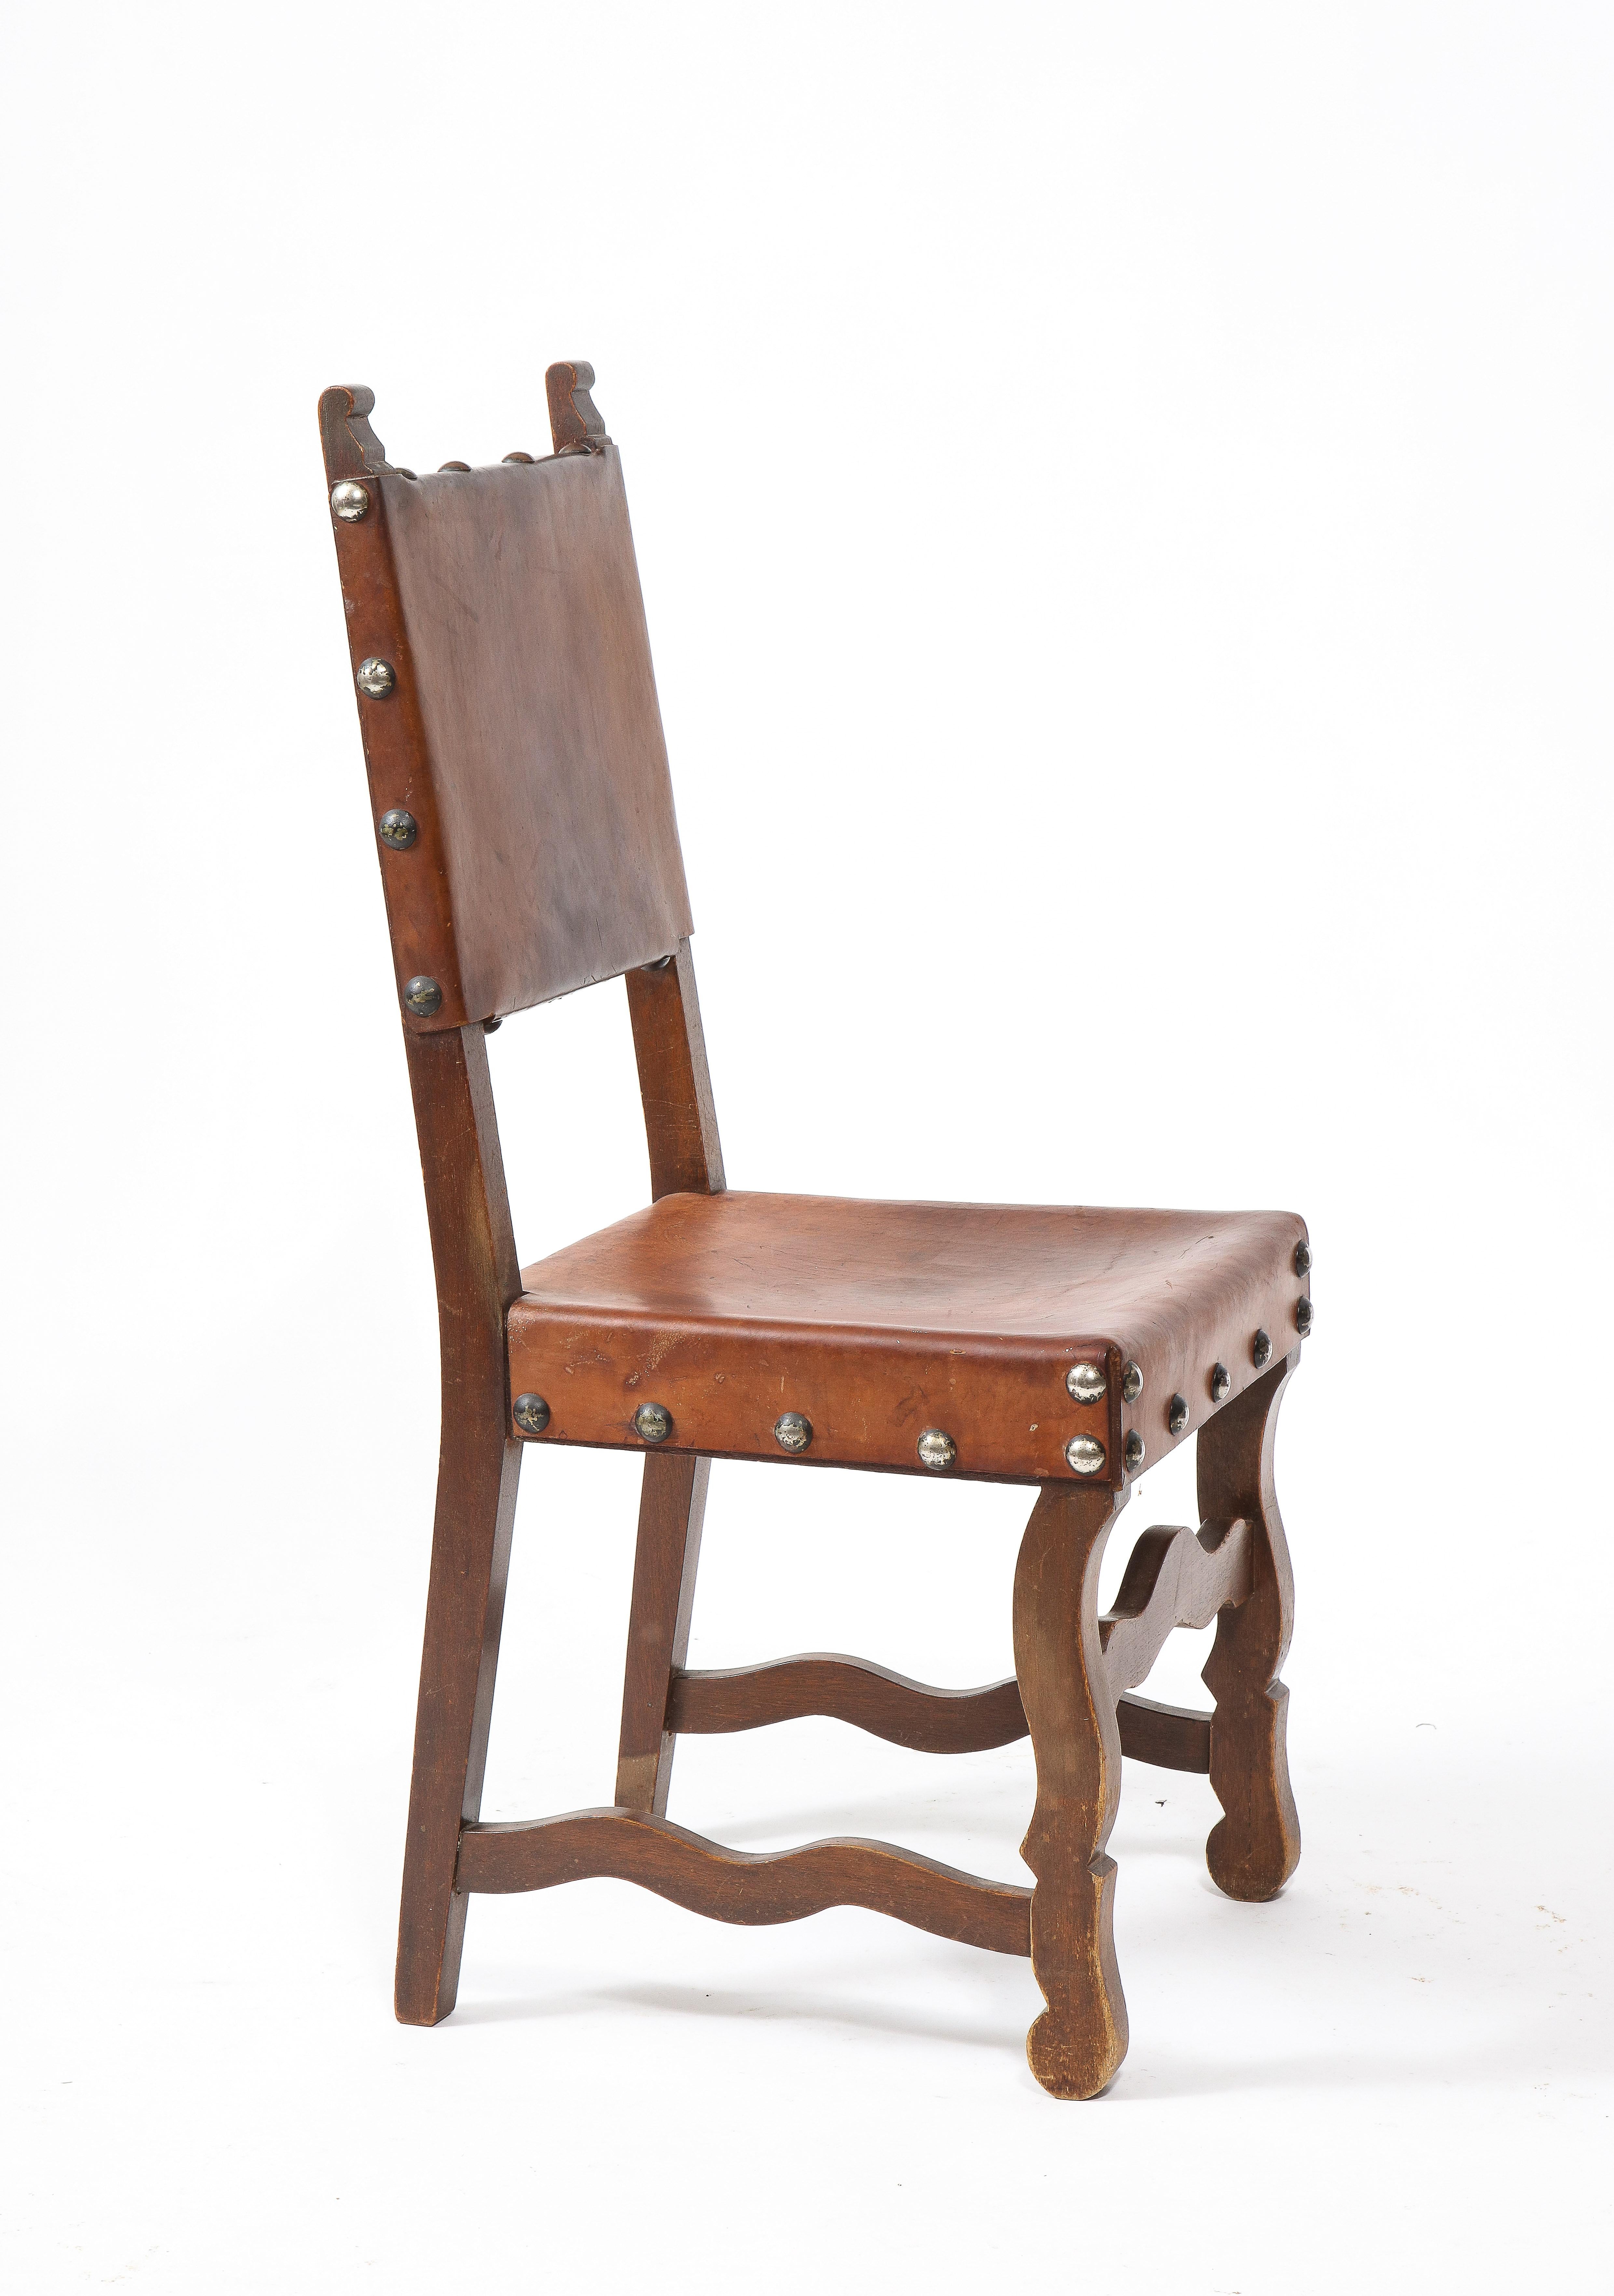 A set of rustic Spanish chairs with leather slings, classic structure in the 